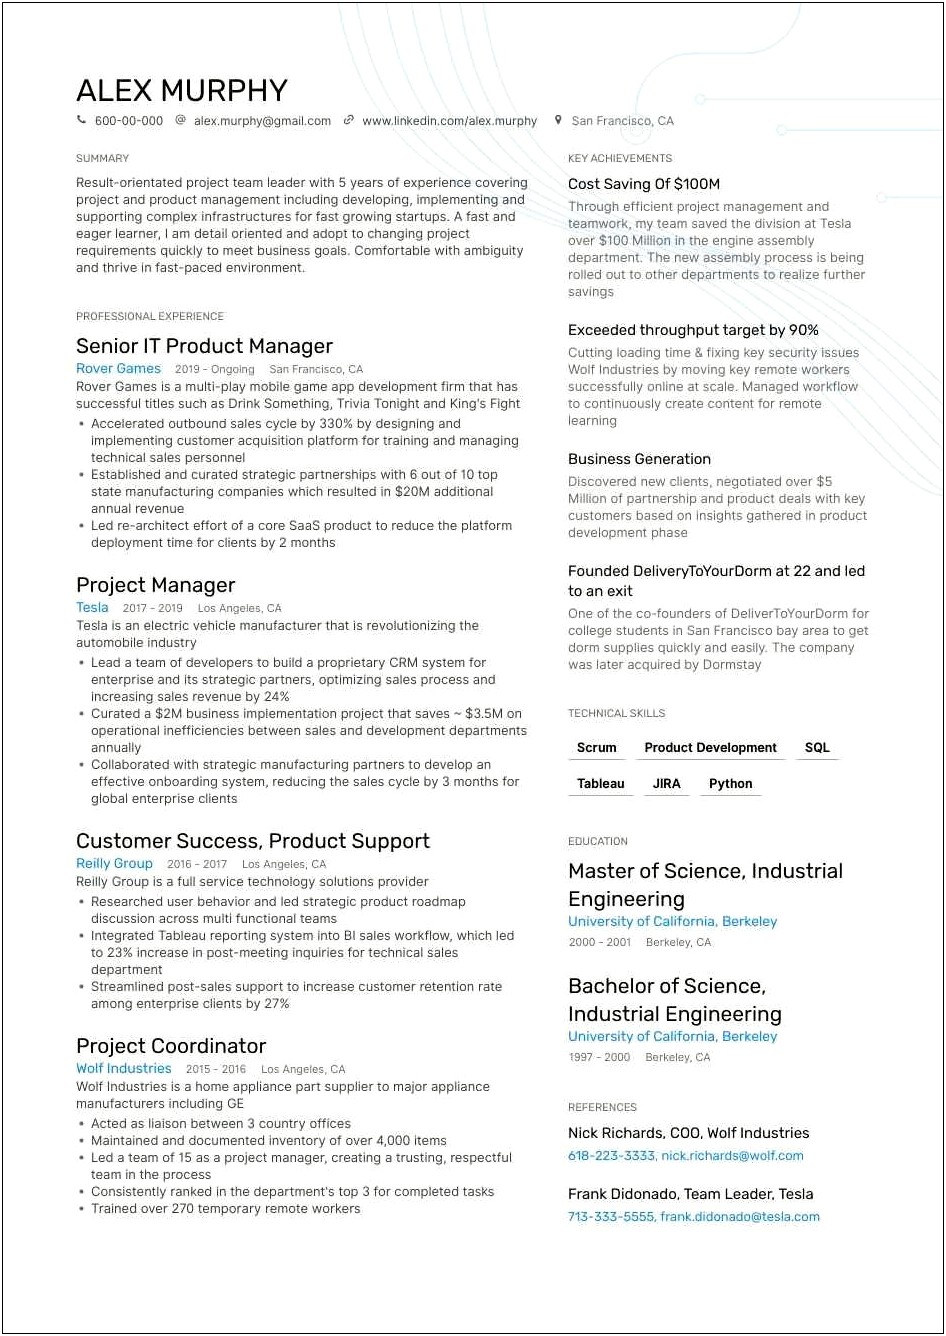 Example Resume Of Bank Product Manager